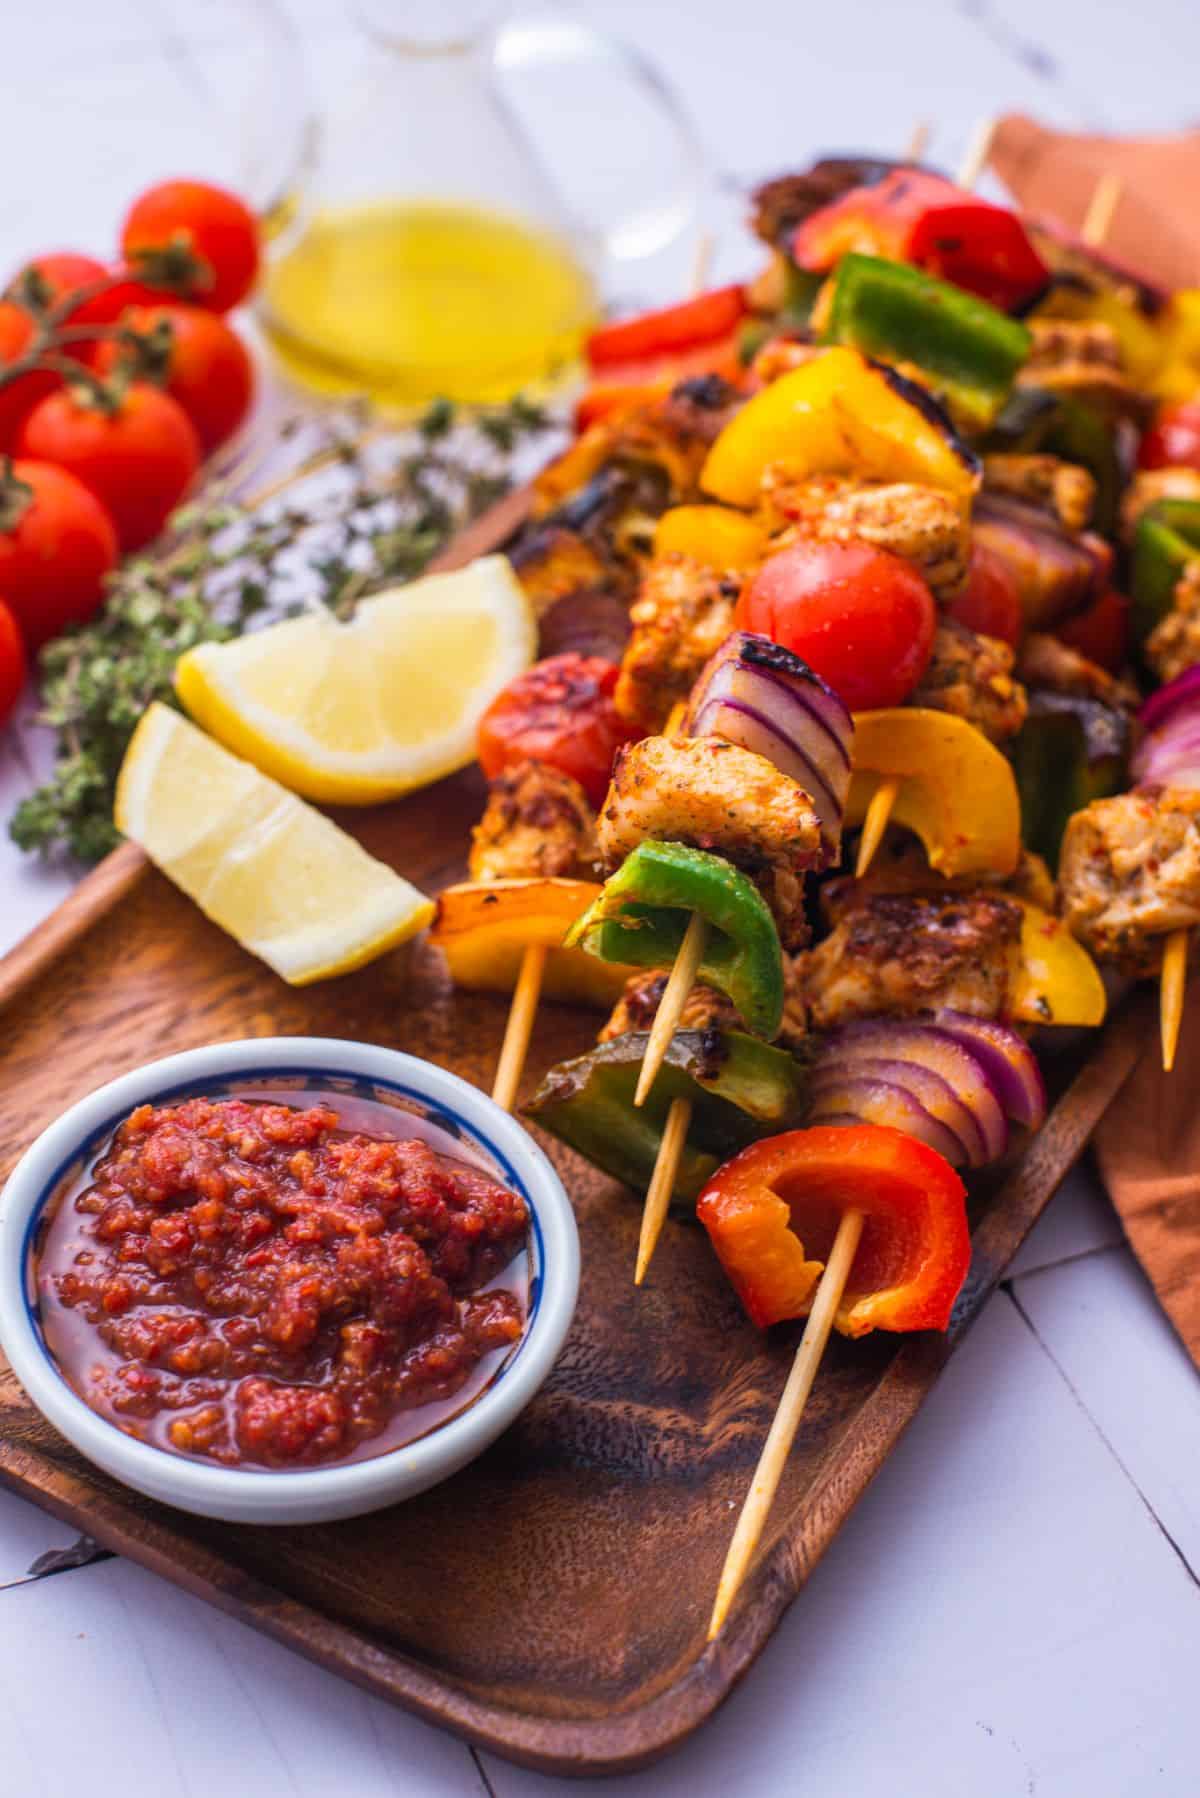 Chicken and veggies grilled on skewers with harissa paste